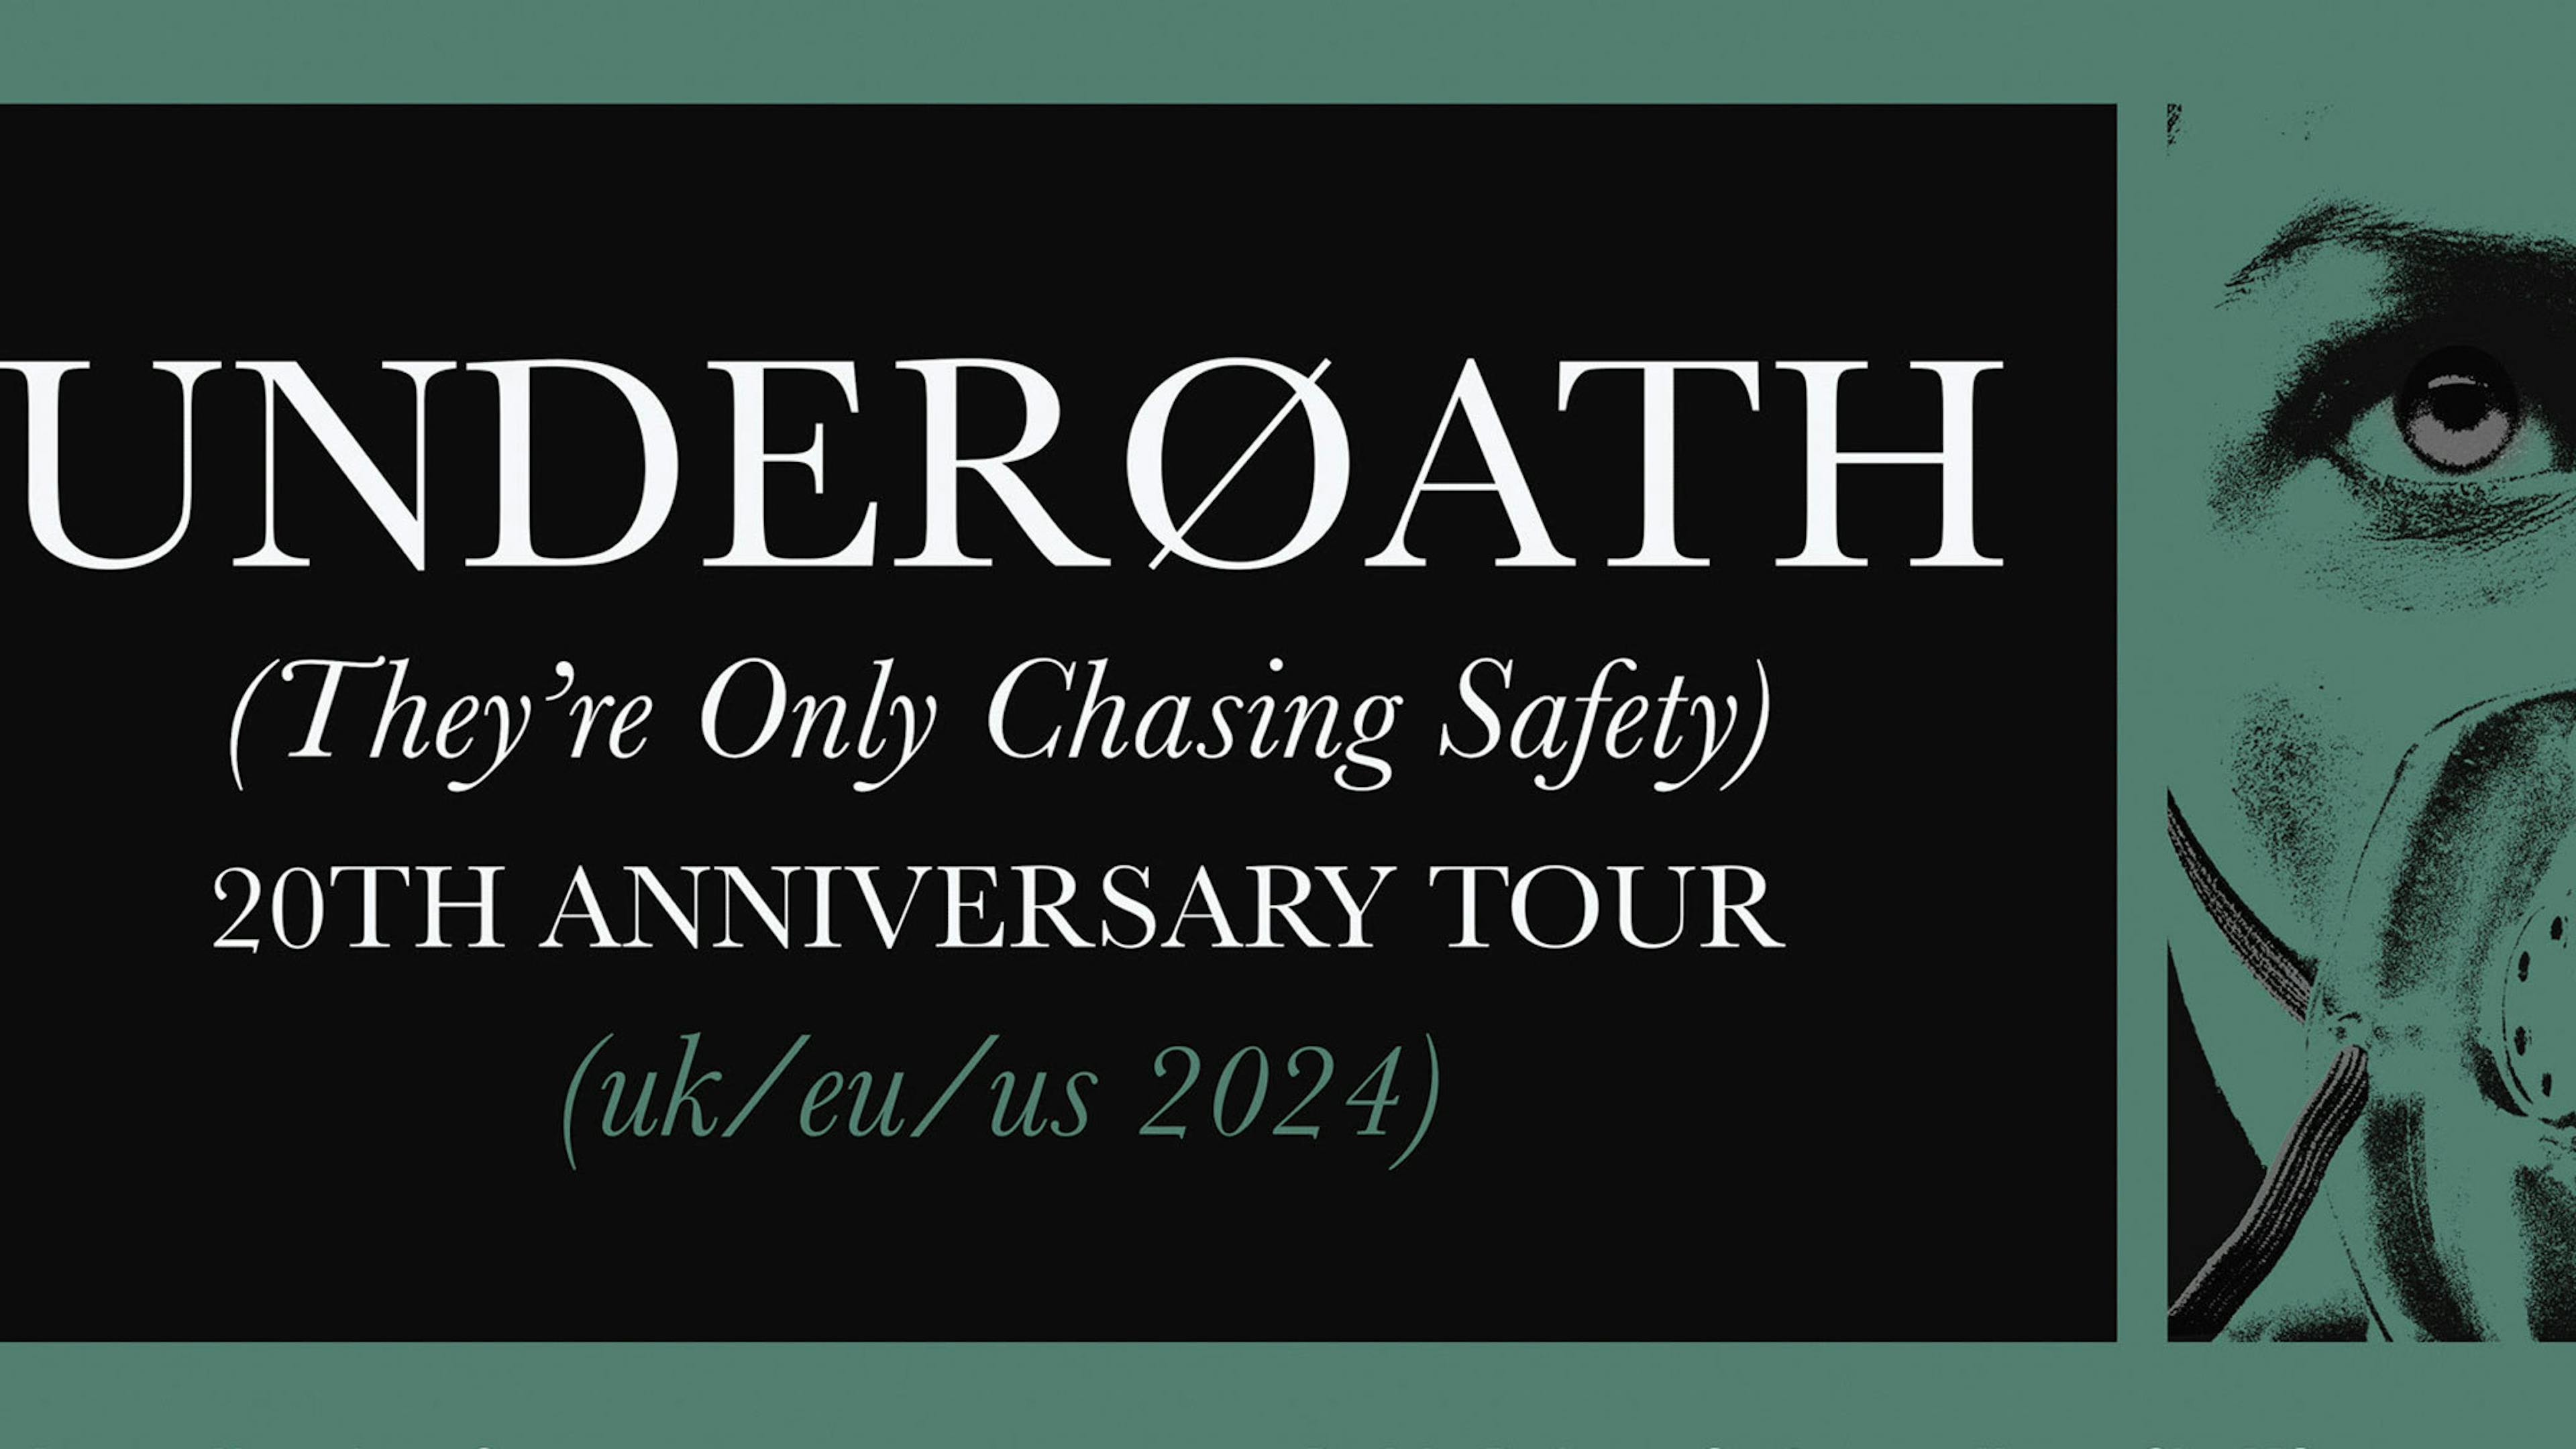 Underoath announce They’re Only Chasing Safety 20th anniversary tour